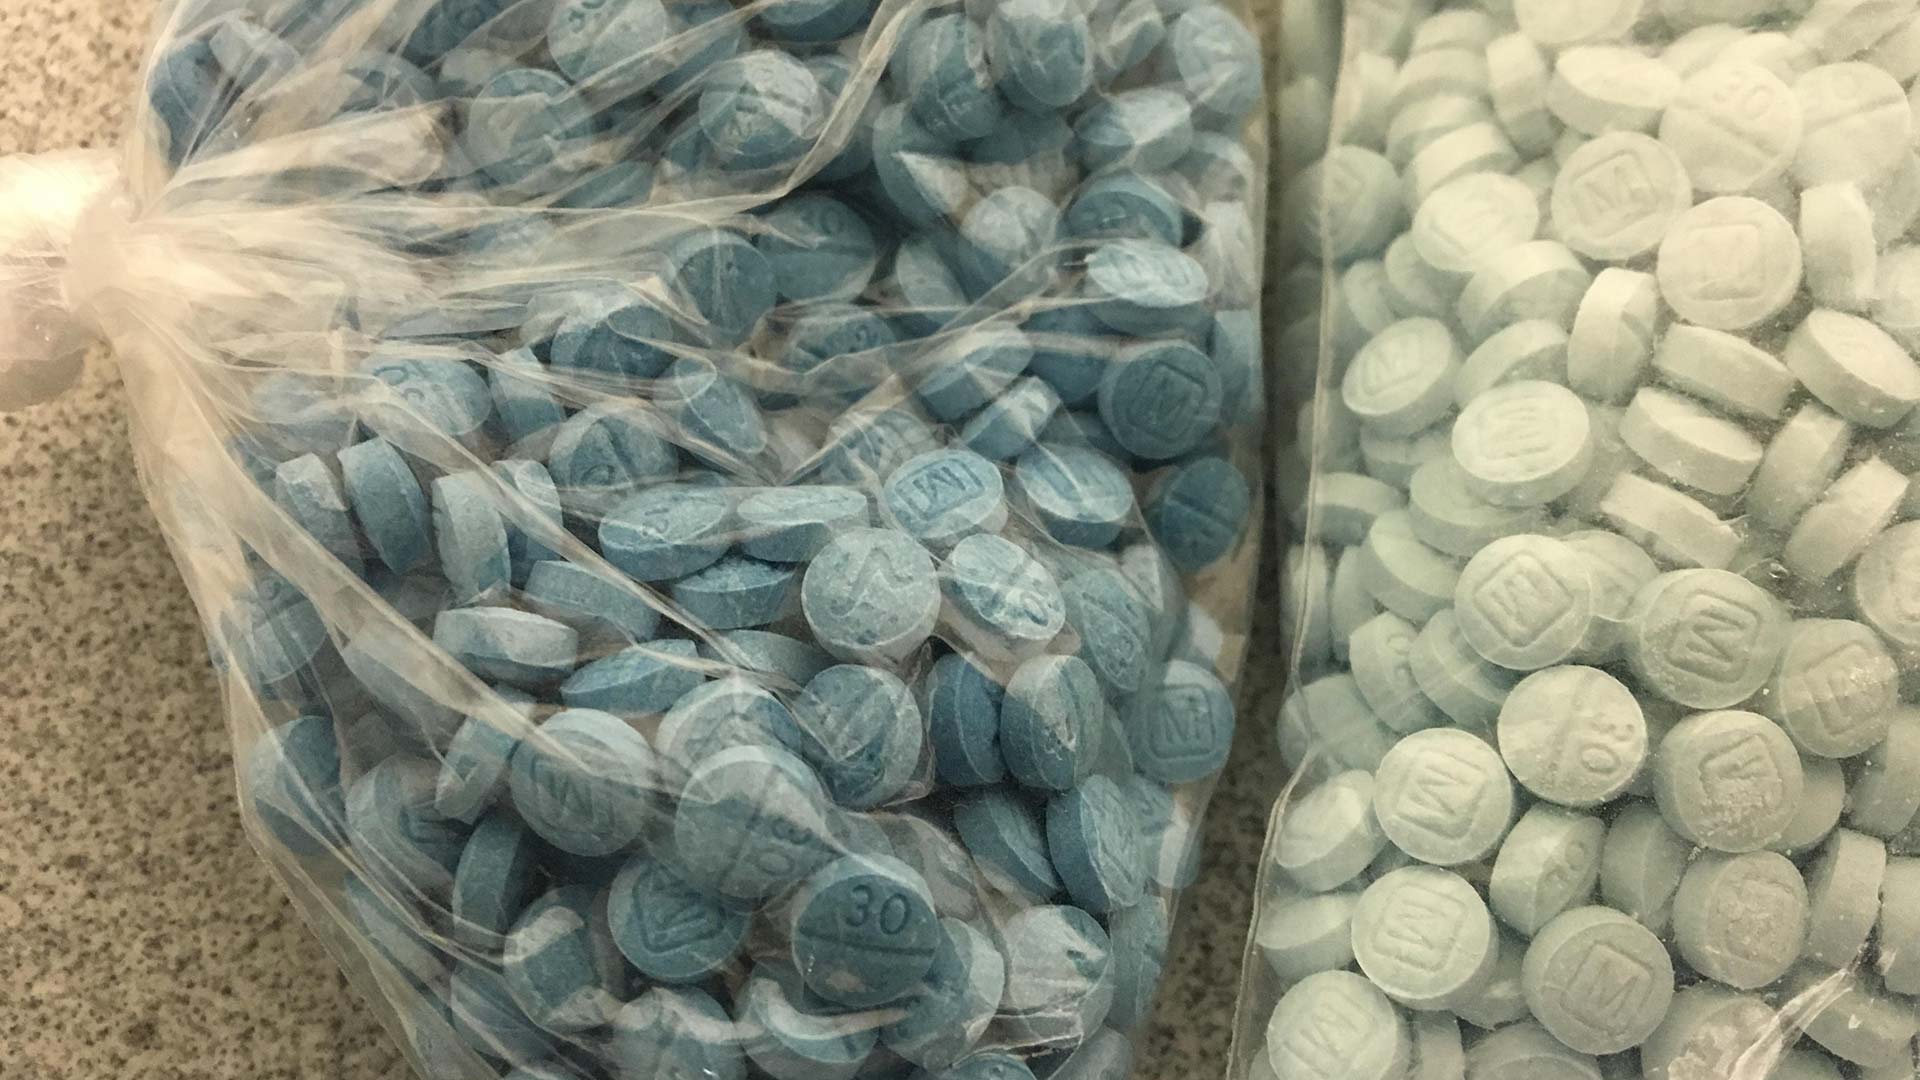 Image released by the DEA in September 2018 of blue pills the agency says are fentanyl disguised as oxycodone.